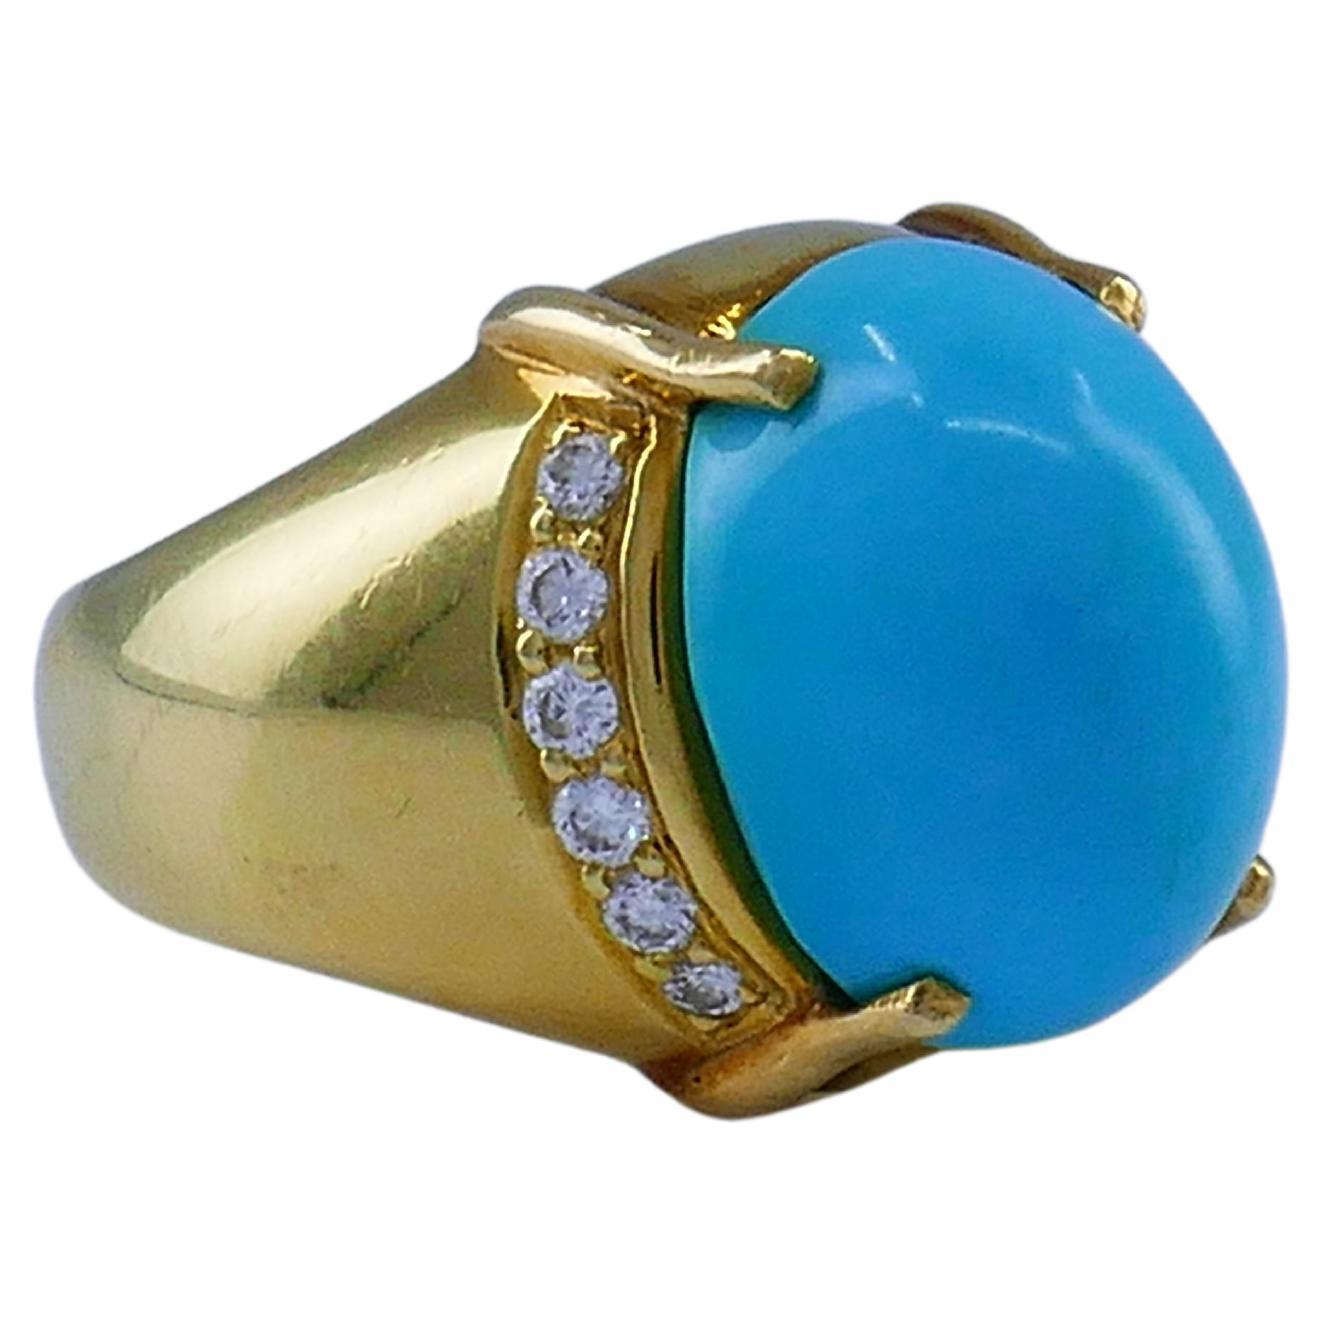 A beautiful 18k gold ring by Cellino, features turquoise and diamonds.
The turquoise is oval cabochon cut. It’s a beautiful stone, four-prong set. There are twelve diamonds, six on each side of the turquoise. The shank is wide in the front and